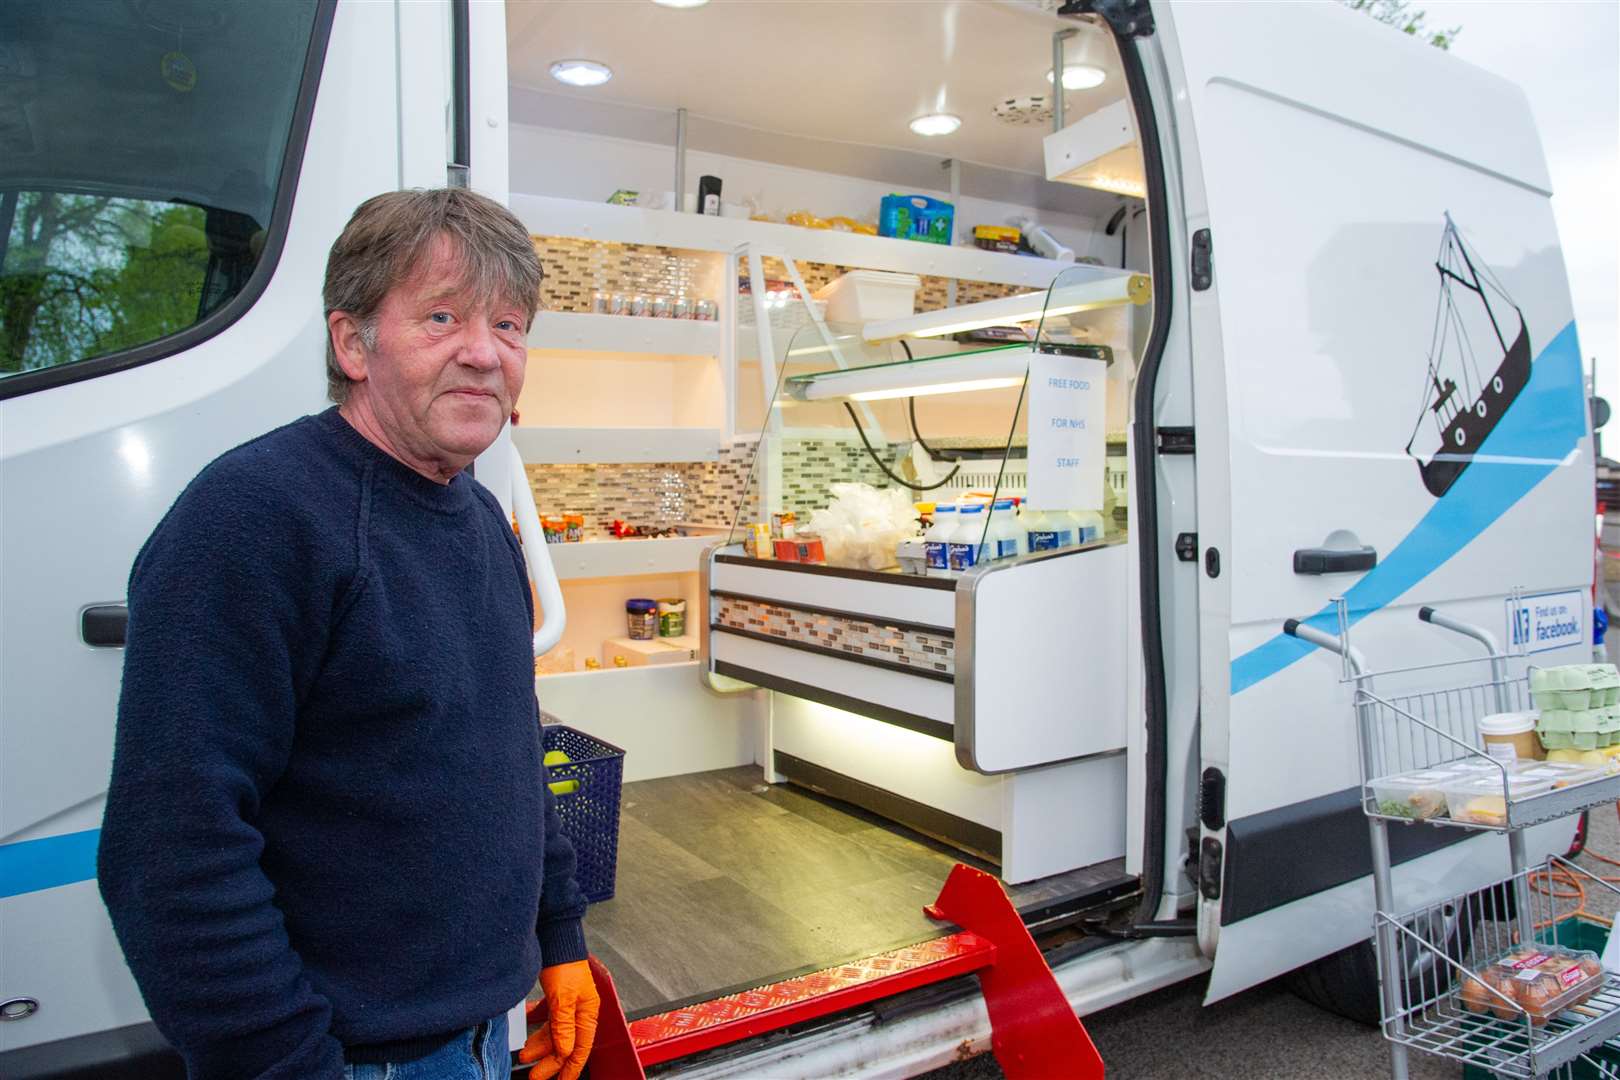 Ian McCallion, owner of the Fish Trawler van, has been taking his van to Dr Gray's Hospital every evening to provide essentials, free of charge, to NHS staff. Picture: Daniel Forsyth